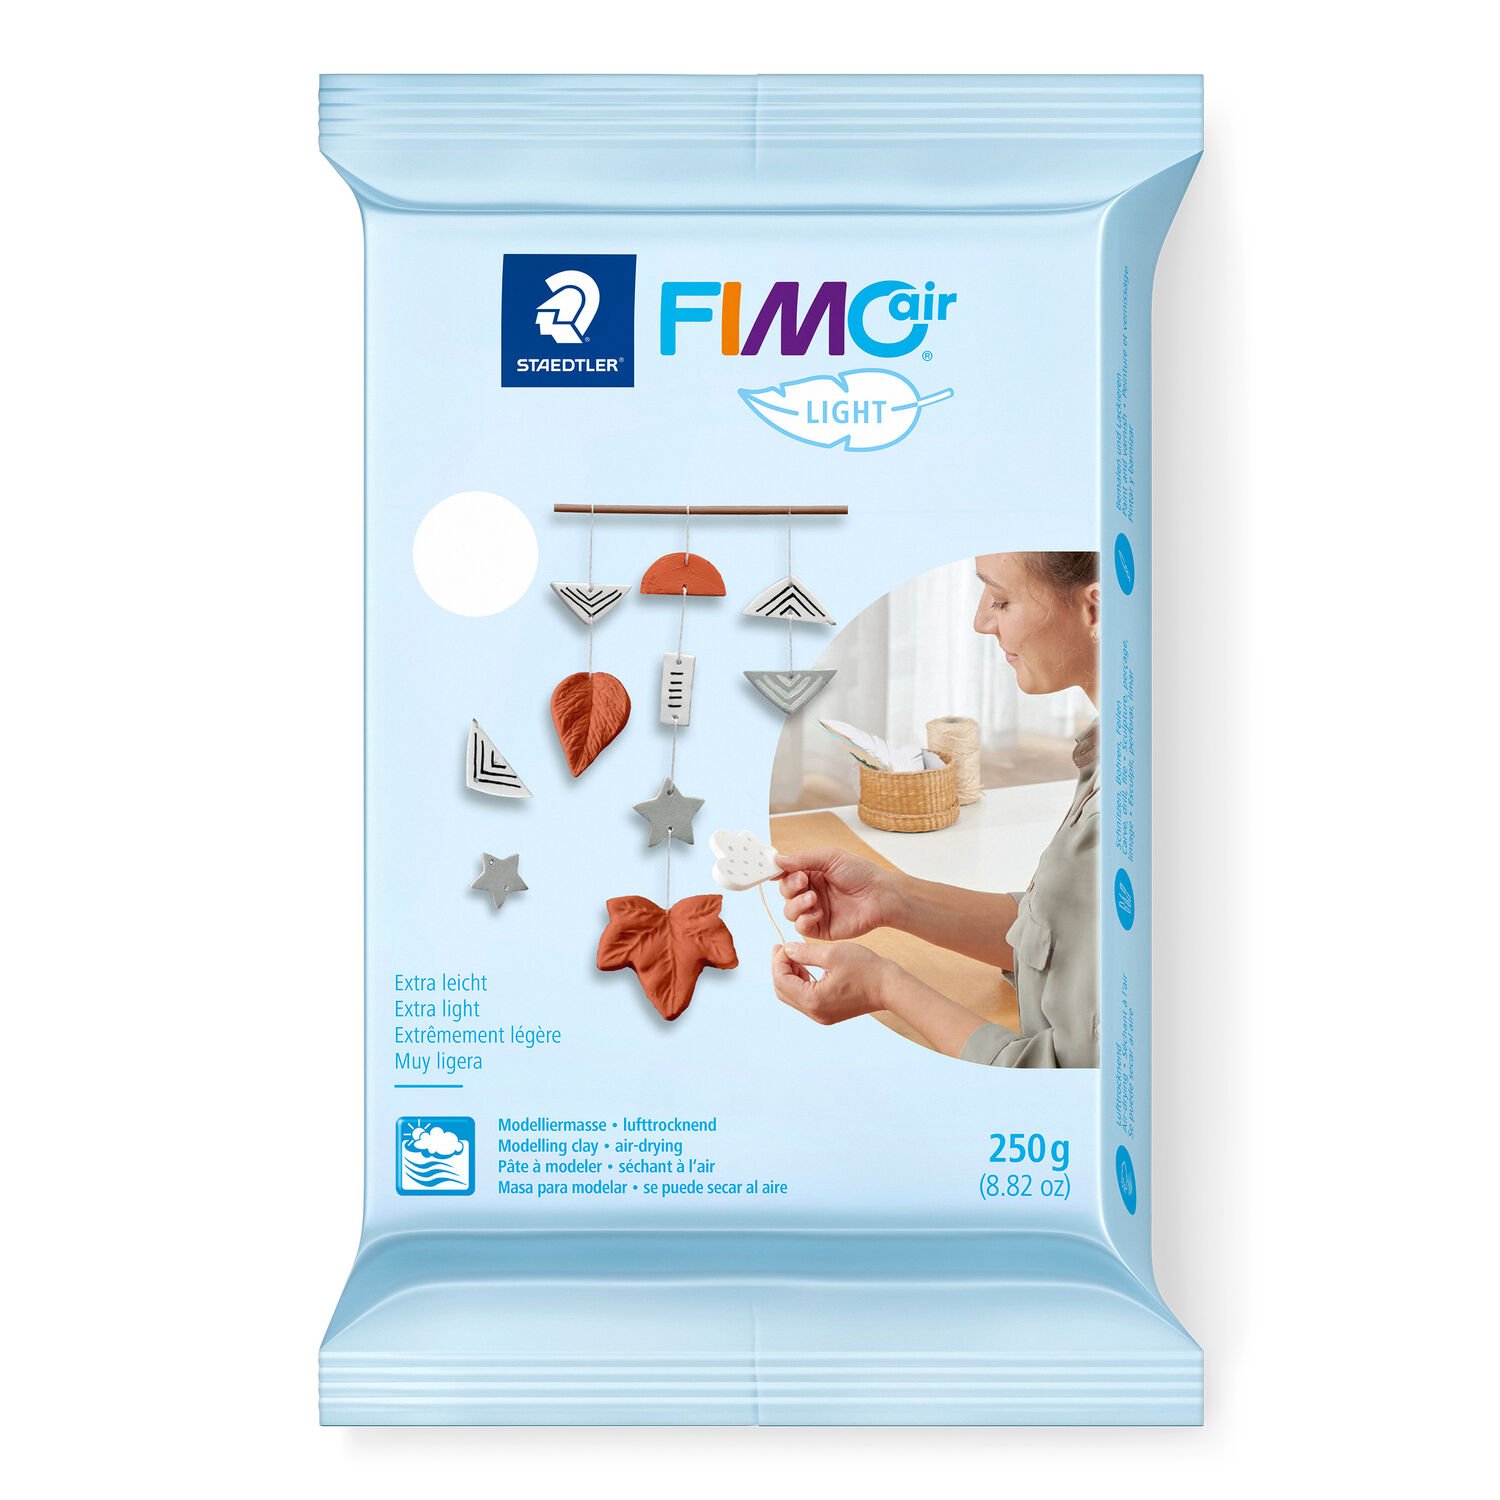 FIMO®air light 8131 - Air-drying modelling clay